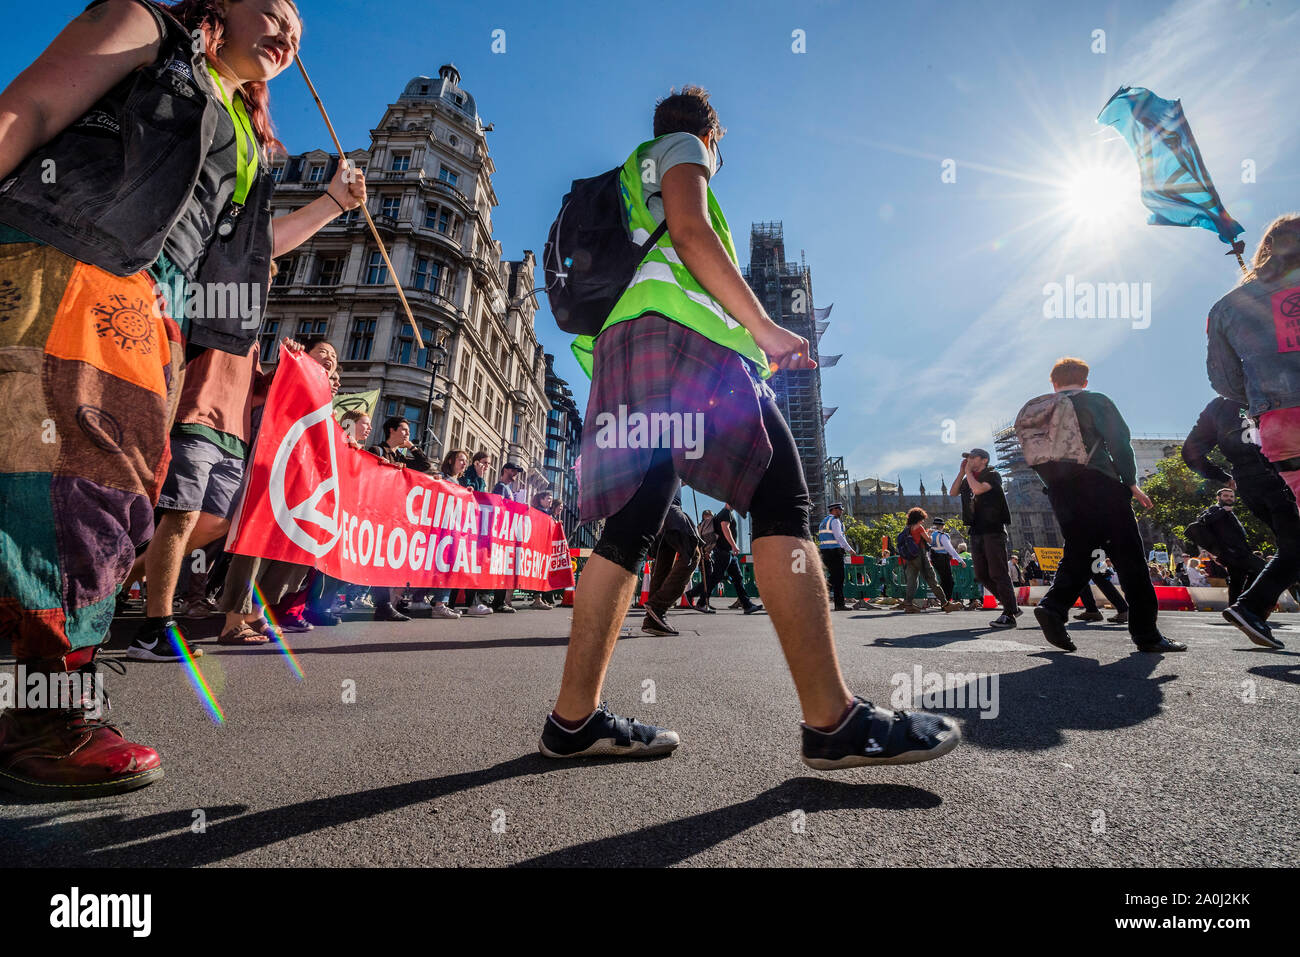 London, UK. 20th Sep, 2019. Students march from Kings College - A general strike for Climate Justice, attended by school children, students and adults, is organised by Extinction Rebellion, Greenpeace, Save the Earth and other groups campaigning for the environment. They are again highlighting the climate emergency, with time running out to save the planet from a climate disaster. This is part of the ongoing ER and other protests to demand action by the UK Government on the 'climate crisis'. The action is part of an international co-ordinated protest. Credit: Guy Bell/Alamy Live News Stock Photo